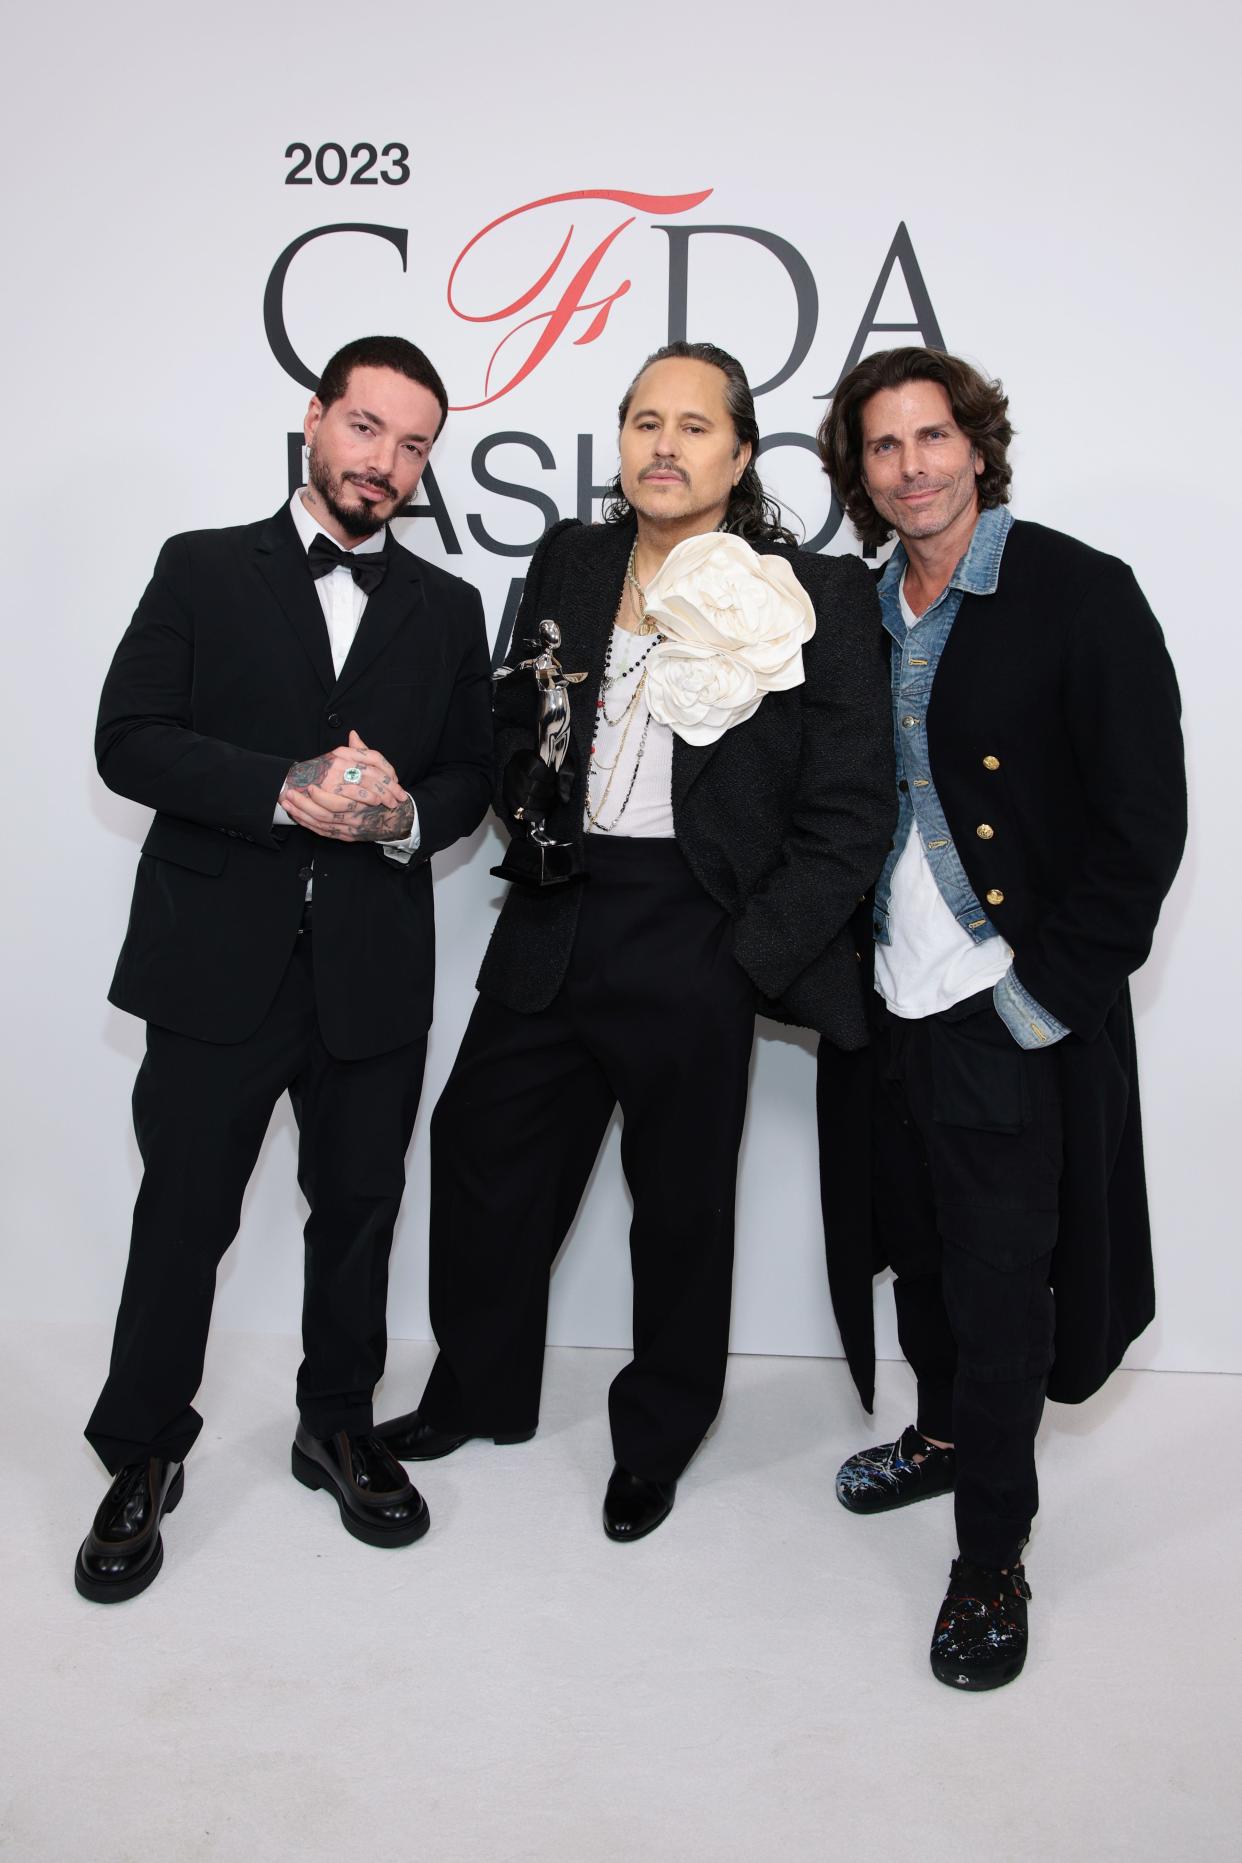 Willy Chavarria, winner of the American menswear designer of the year award, with J Balvin, left, and Greg Lauren, right, at the 2023 CFDA Fashion Awards at American Museum of Natural History on Monday in New York City.